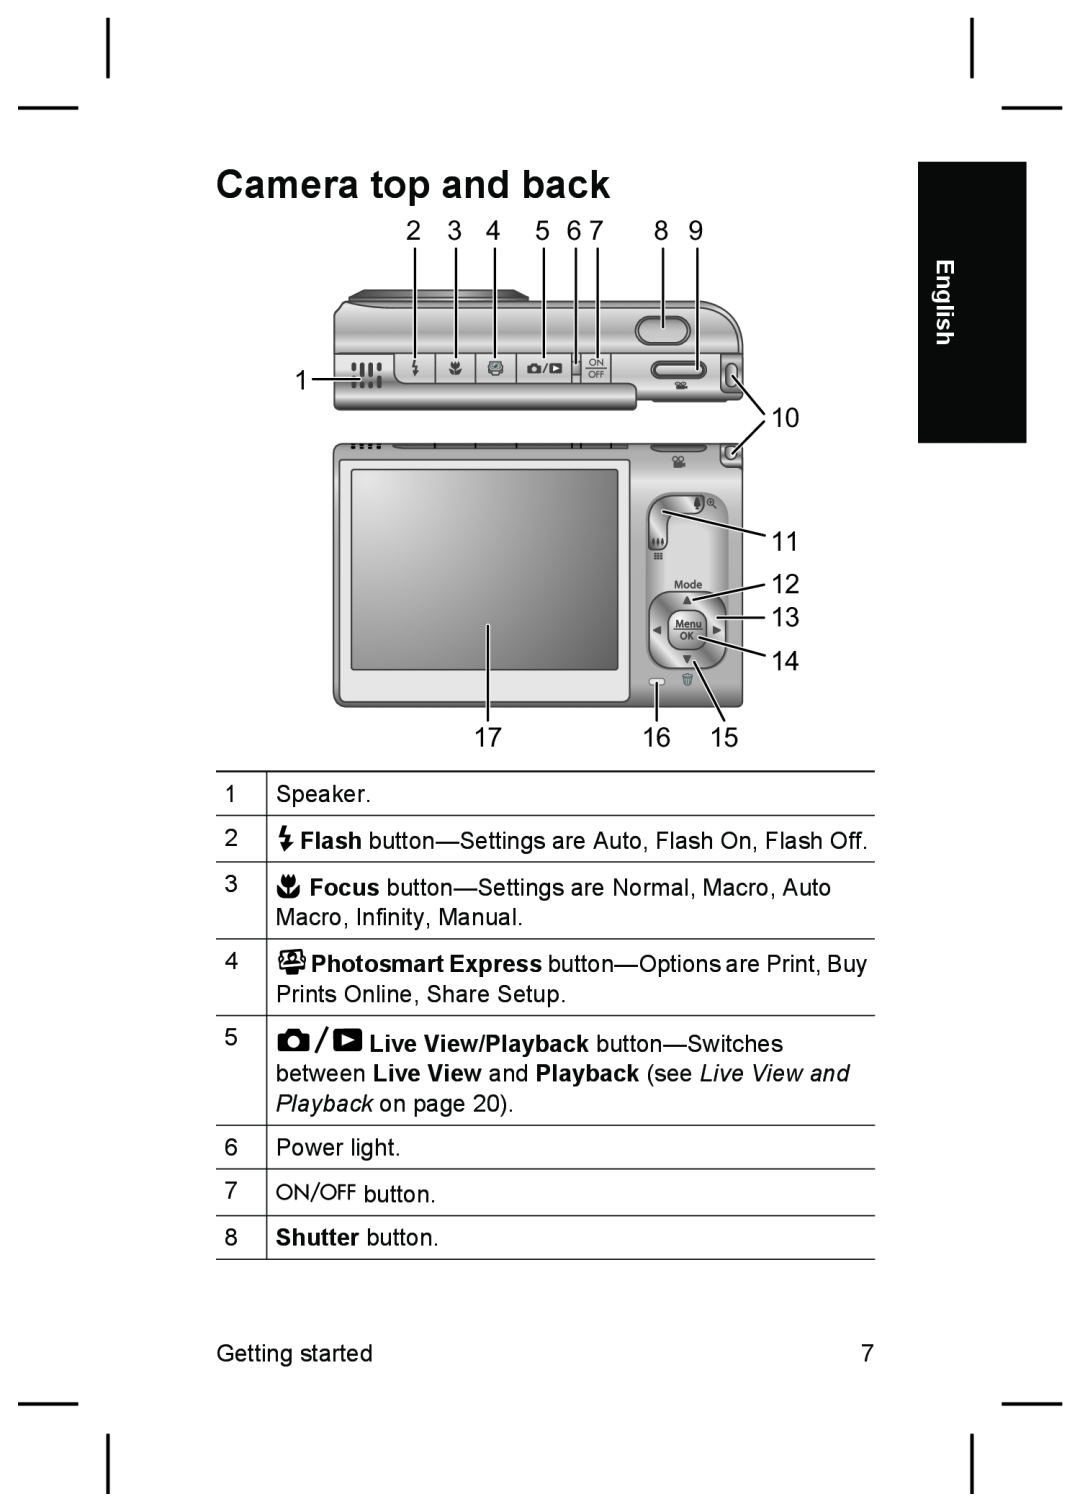 HP R927 manual Camera top and back, Shutter button 